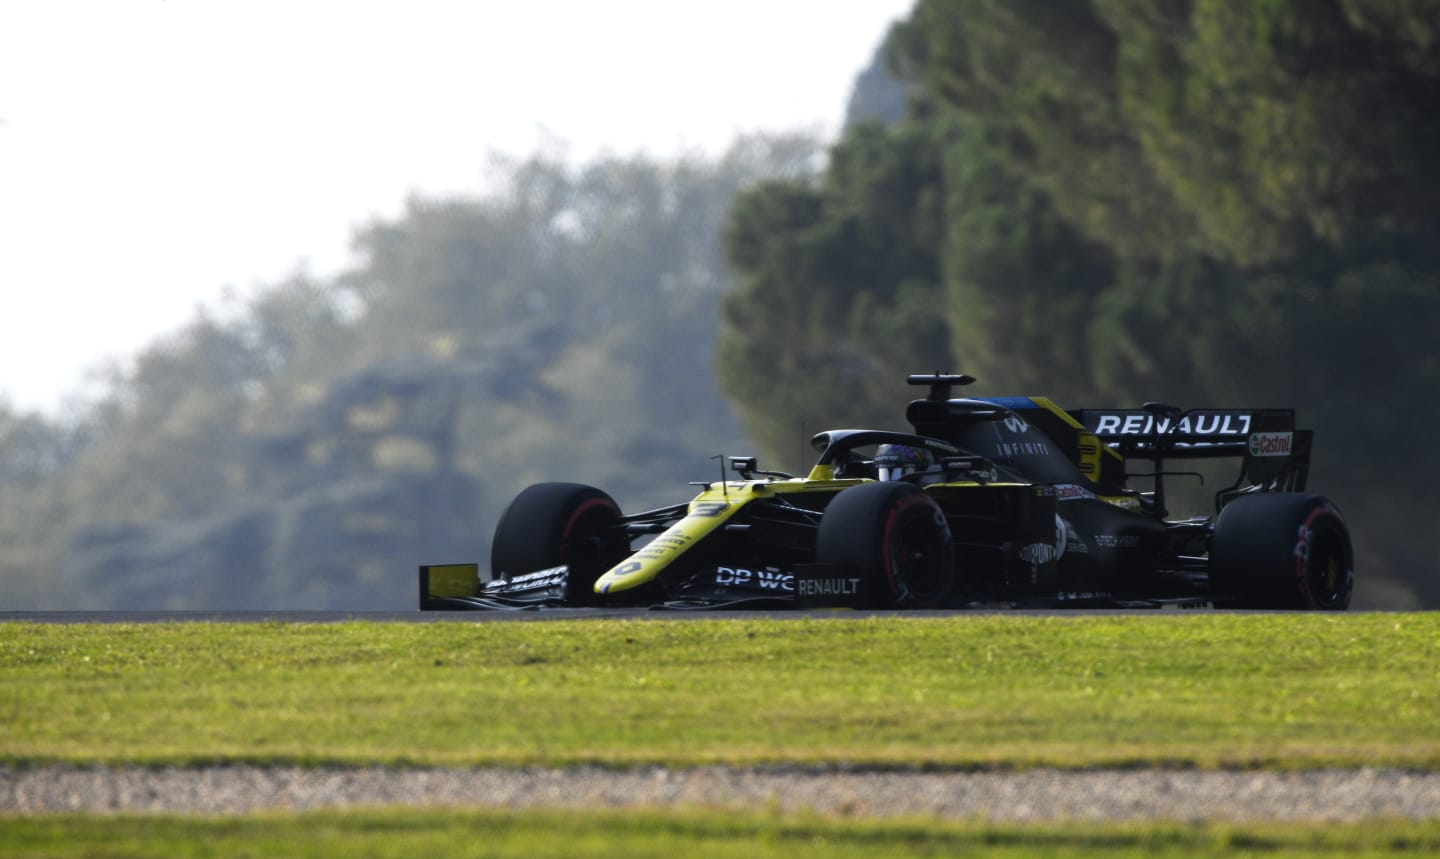 IMOLA, ITALY - OCTOBER 31: Daniel Ricciardo of Australia driving the (3) Renault Sport Formula One Team RS20 on track during qualifying ahead of the F1 Grand Prix of Emilia Romagna at Autodromo Enzo e Dino Ferrari on October 31, 2020 in Imola, Italy. (Photo by Rudy Carezzevoli/Getty Images)